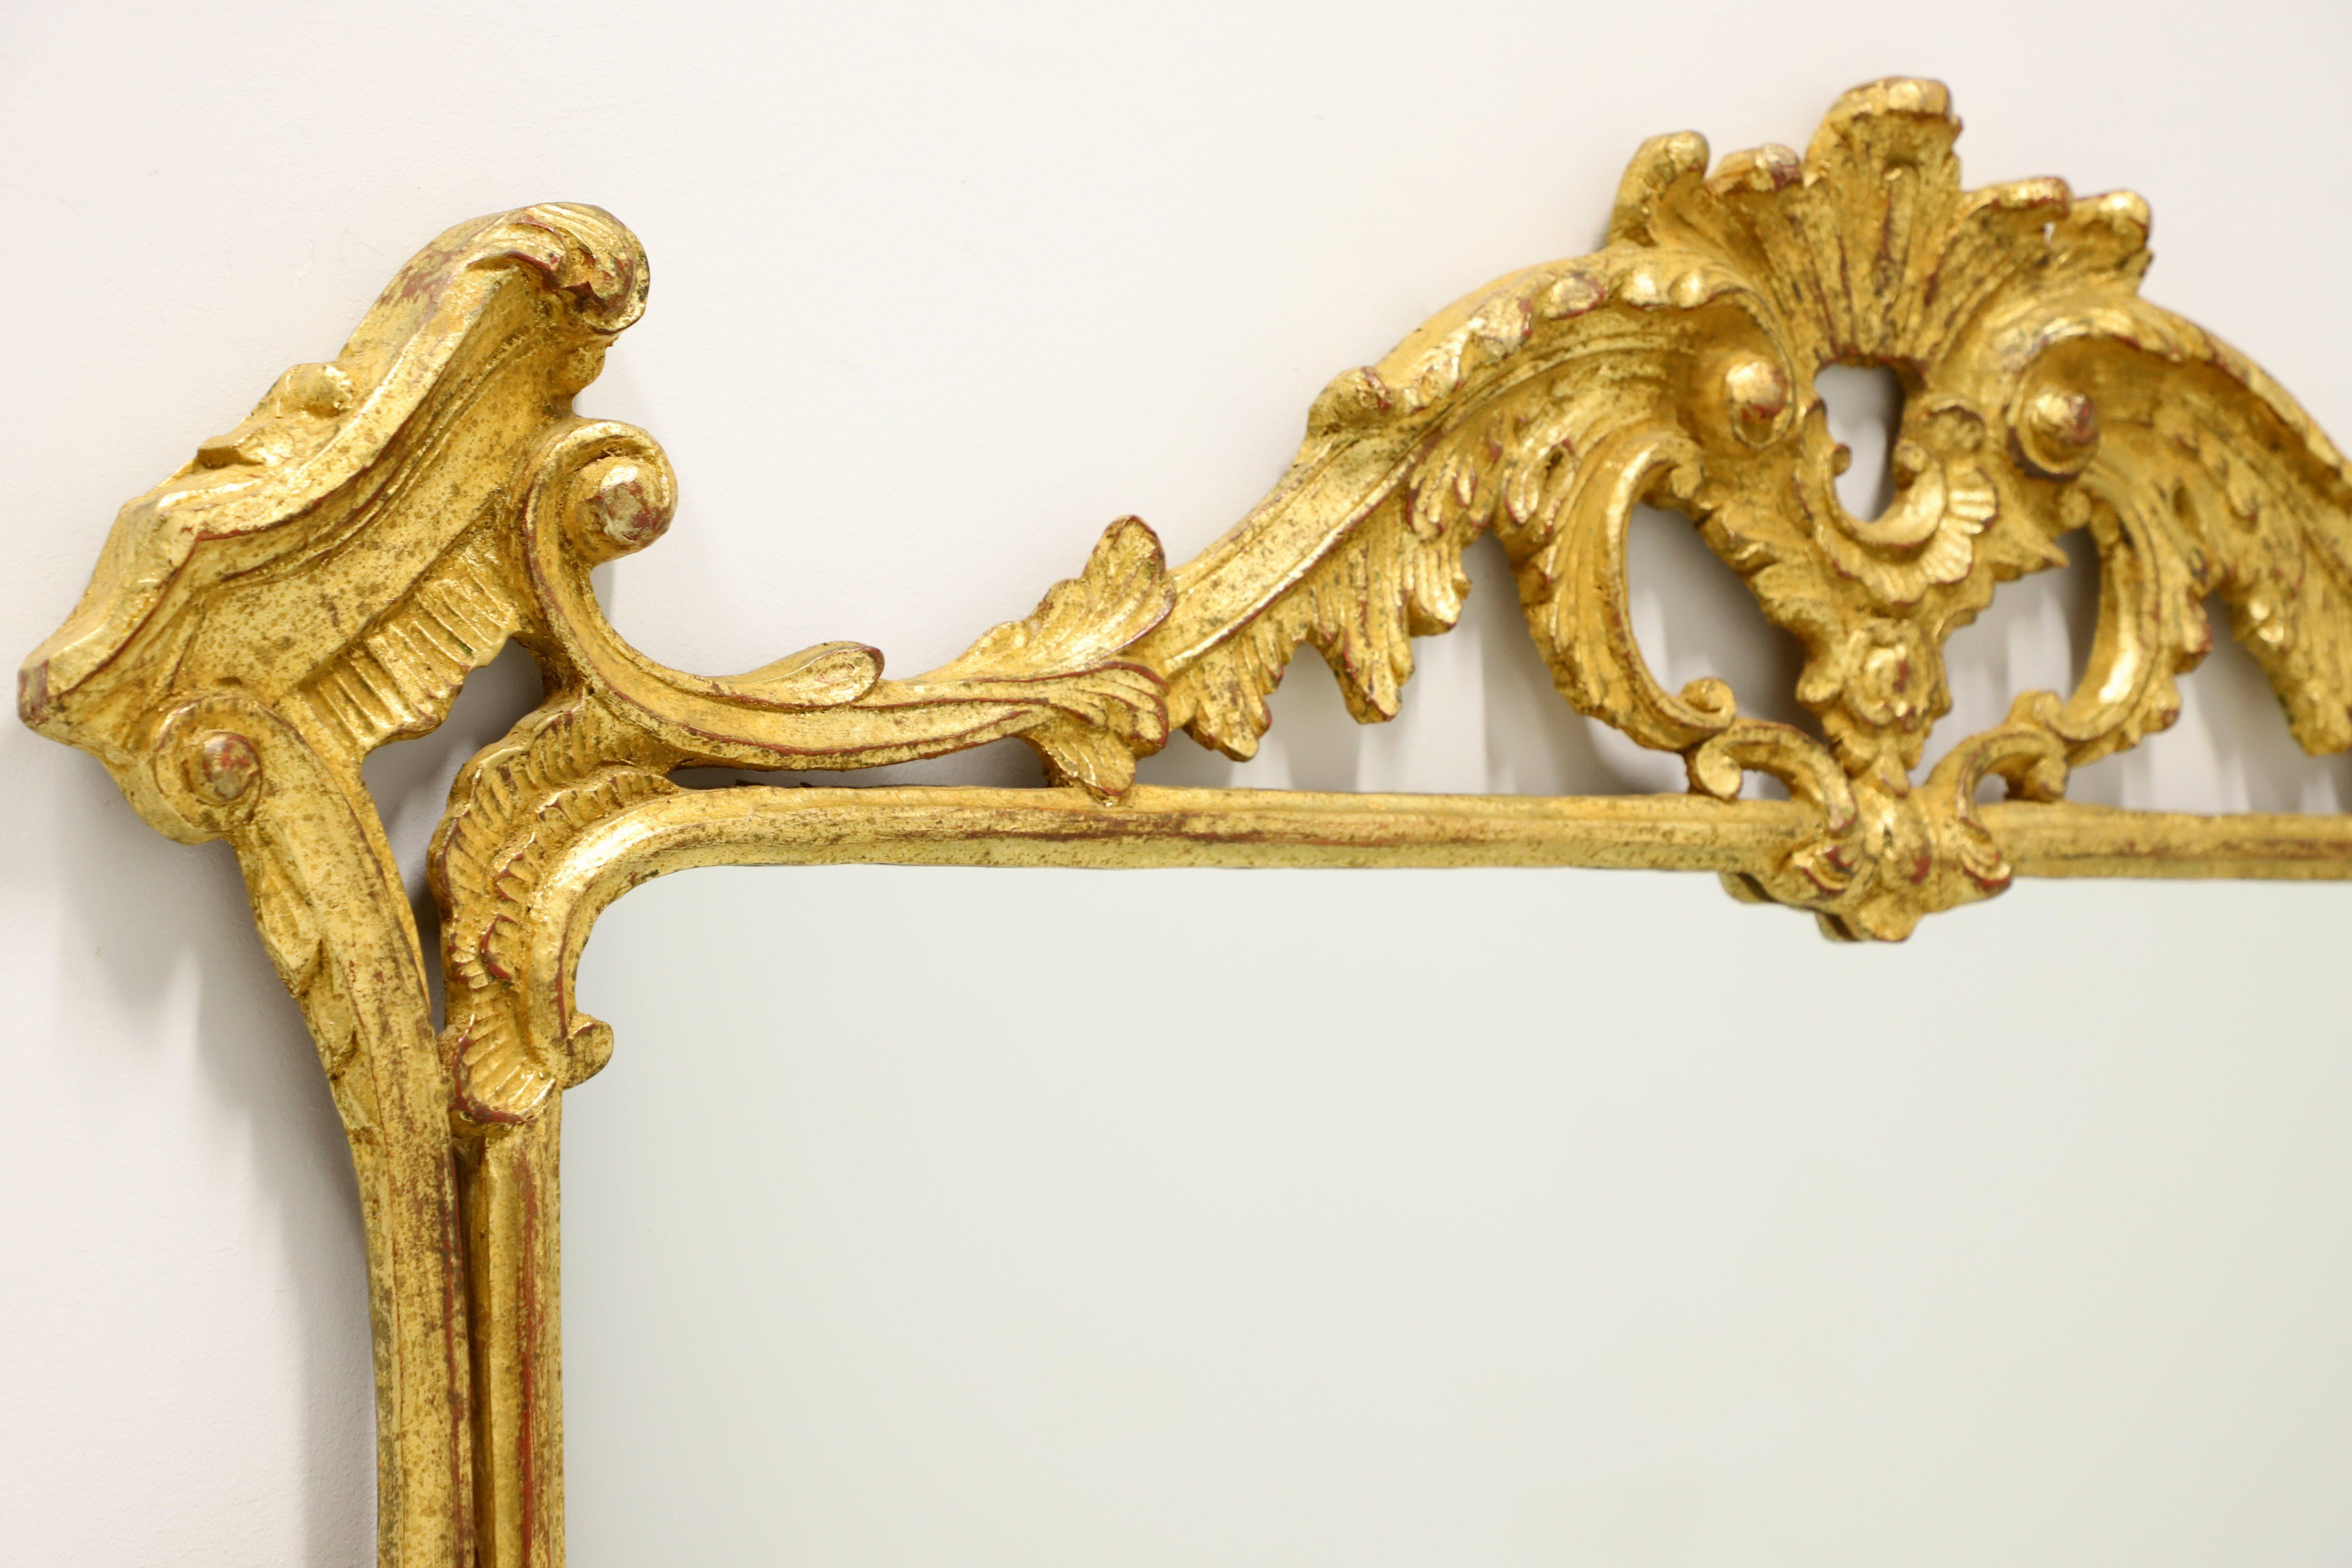 A French Rococo style wall mirror, unbranded. Mirror glass in an ornate gold gilt composite frame with exquisite design elements, acanthus leaves to top center & bottom sides, and other delicately carved ornamentation. Likely made in the USA, in the